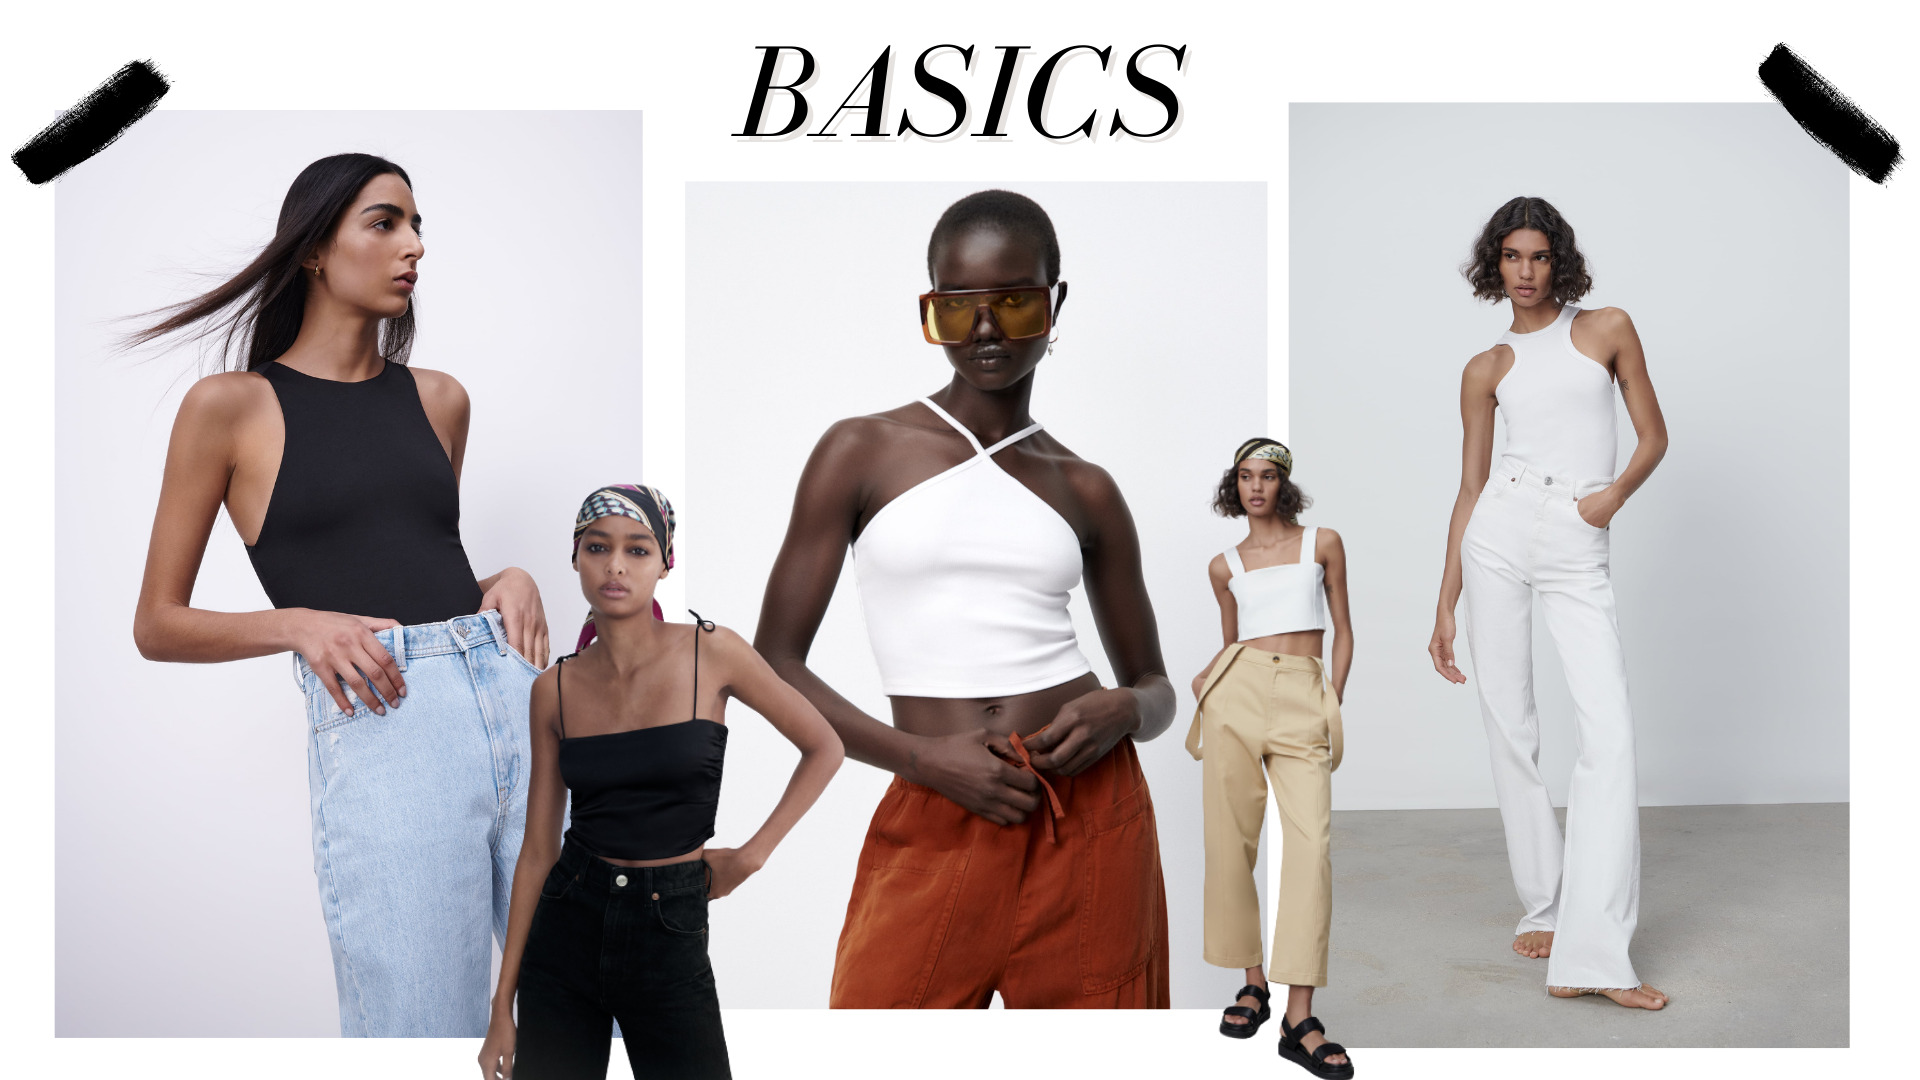 Basics are the number one step when it comes to looking expensive! If you only have patterns and very statement pieces in your wardrobe, you will not be able to achieve an expensive-looking outfit.